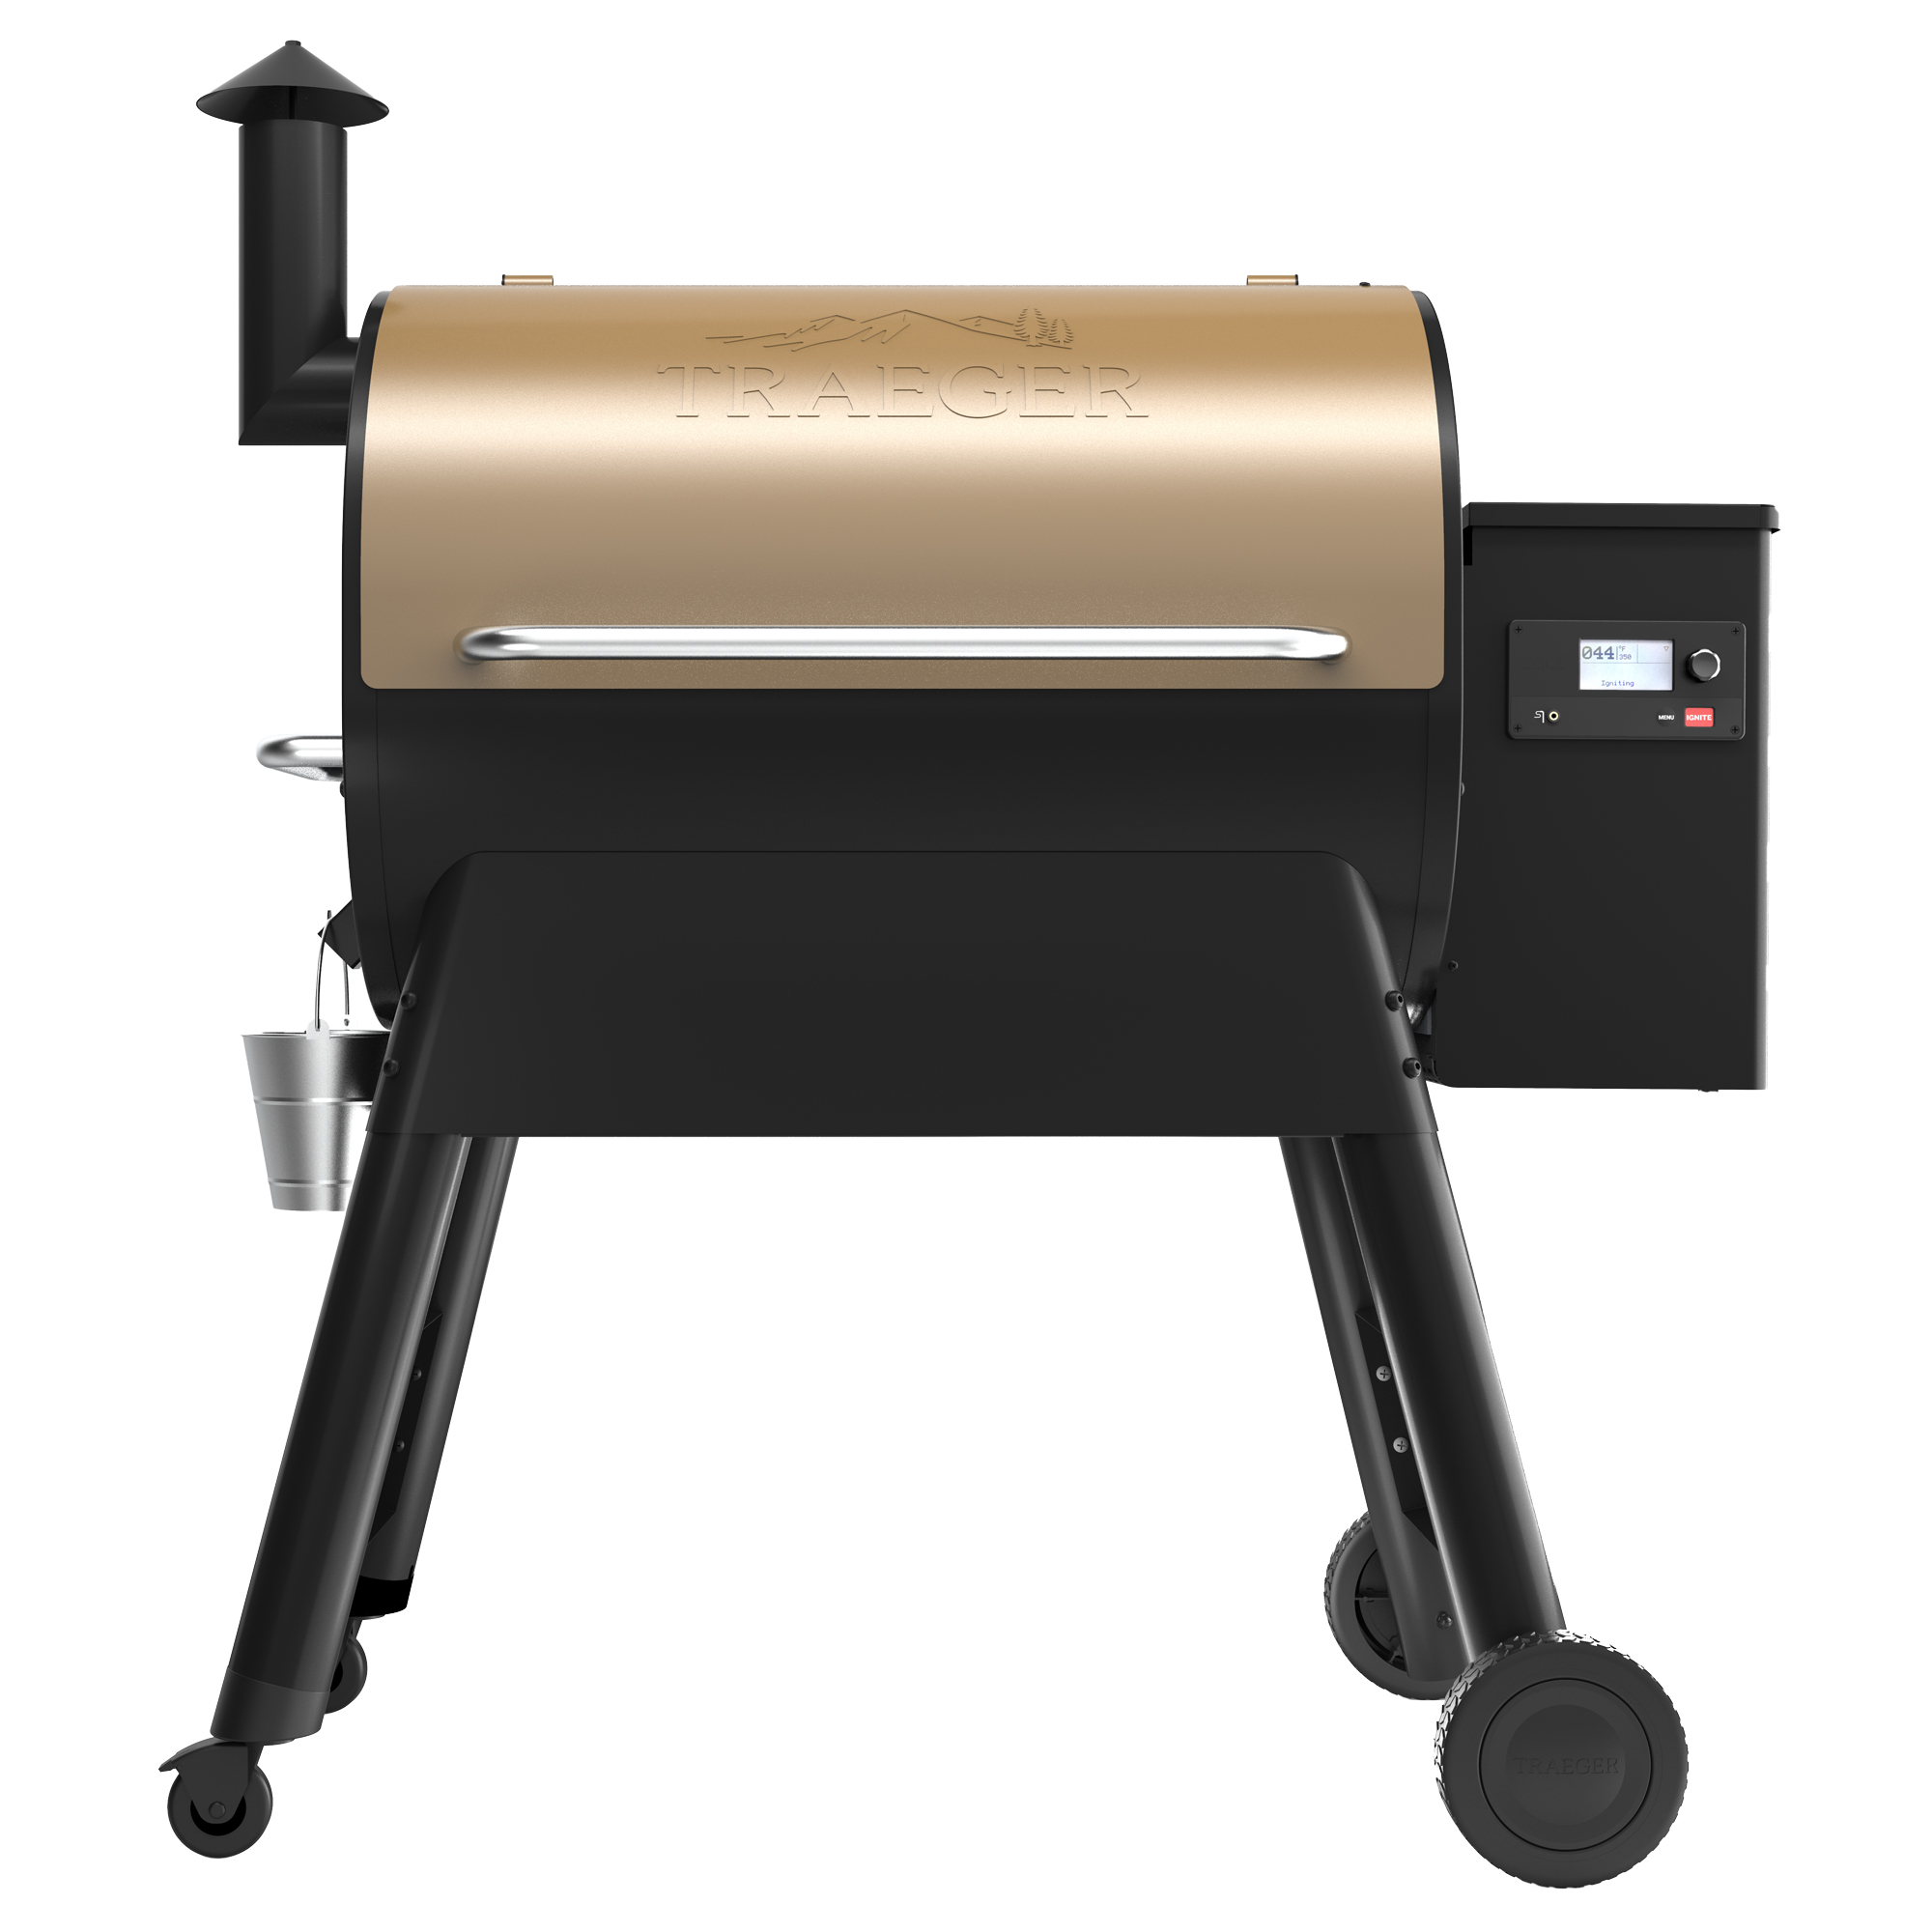 Traeger Pellet Grills Pro 780 Wood Pellet Grill and Smoker - Bronze - image 1 of 12